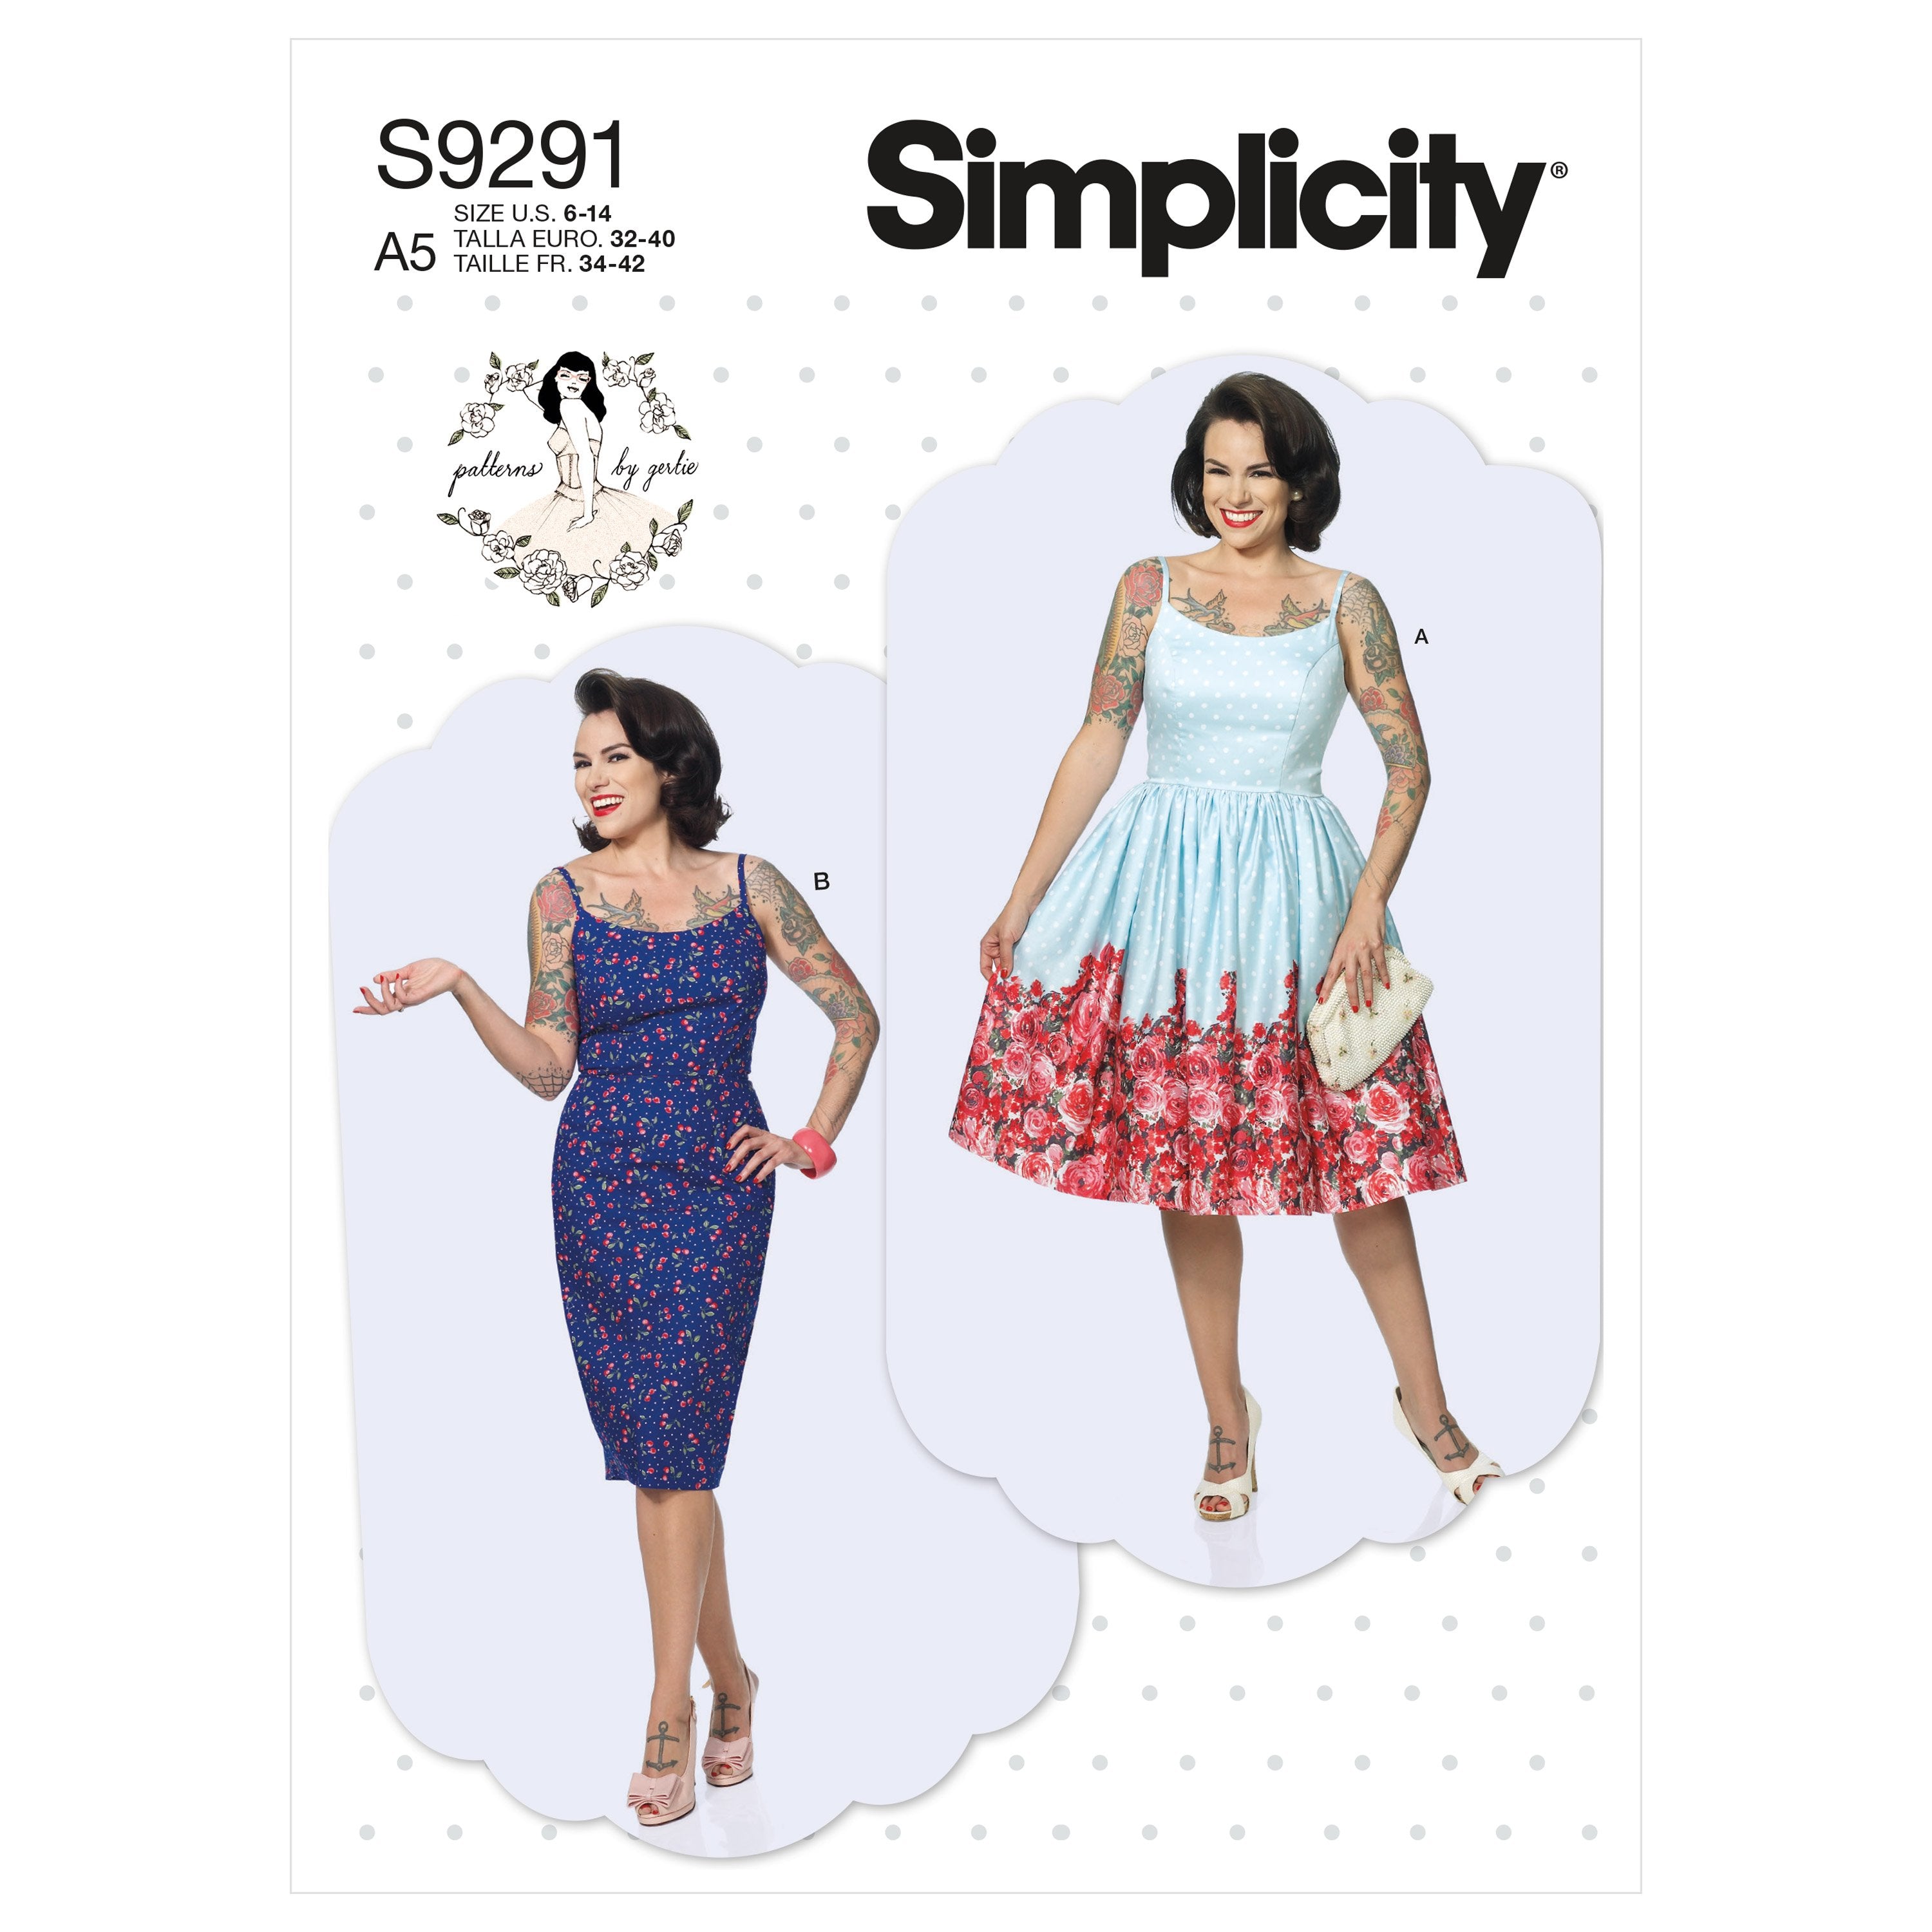 Simplicity 1950's Sewing Pattern 9291 Princess Seam Dresses from Jaycotts Sewing Supplies